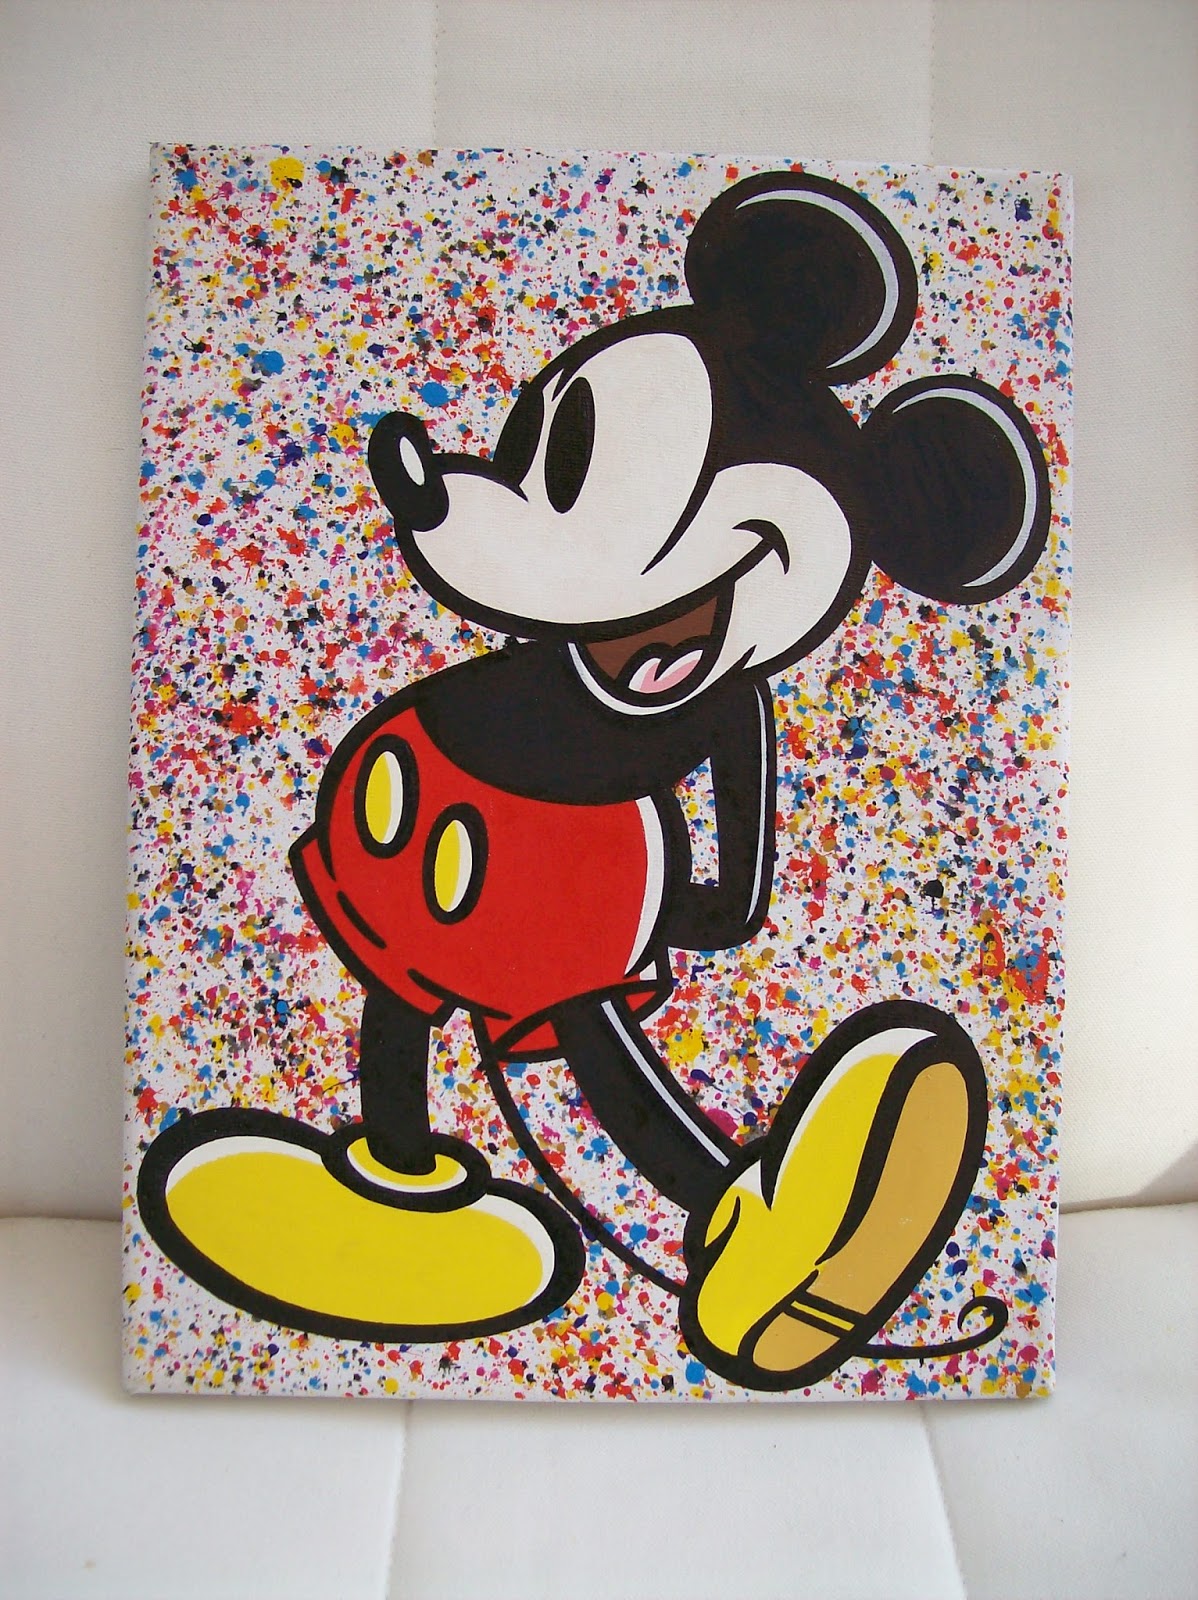 mickey mouse acrylic paintings - Google Search | Disney canvas art